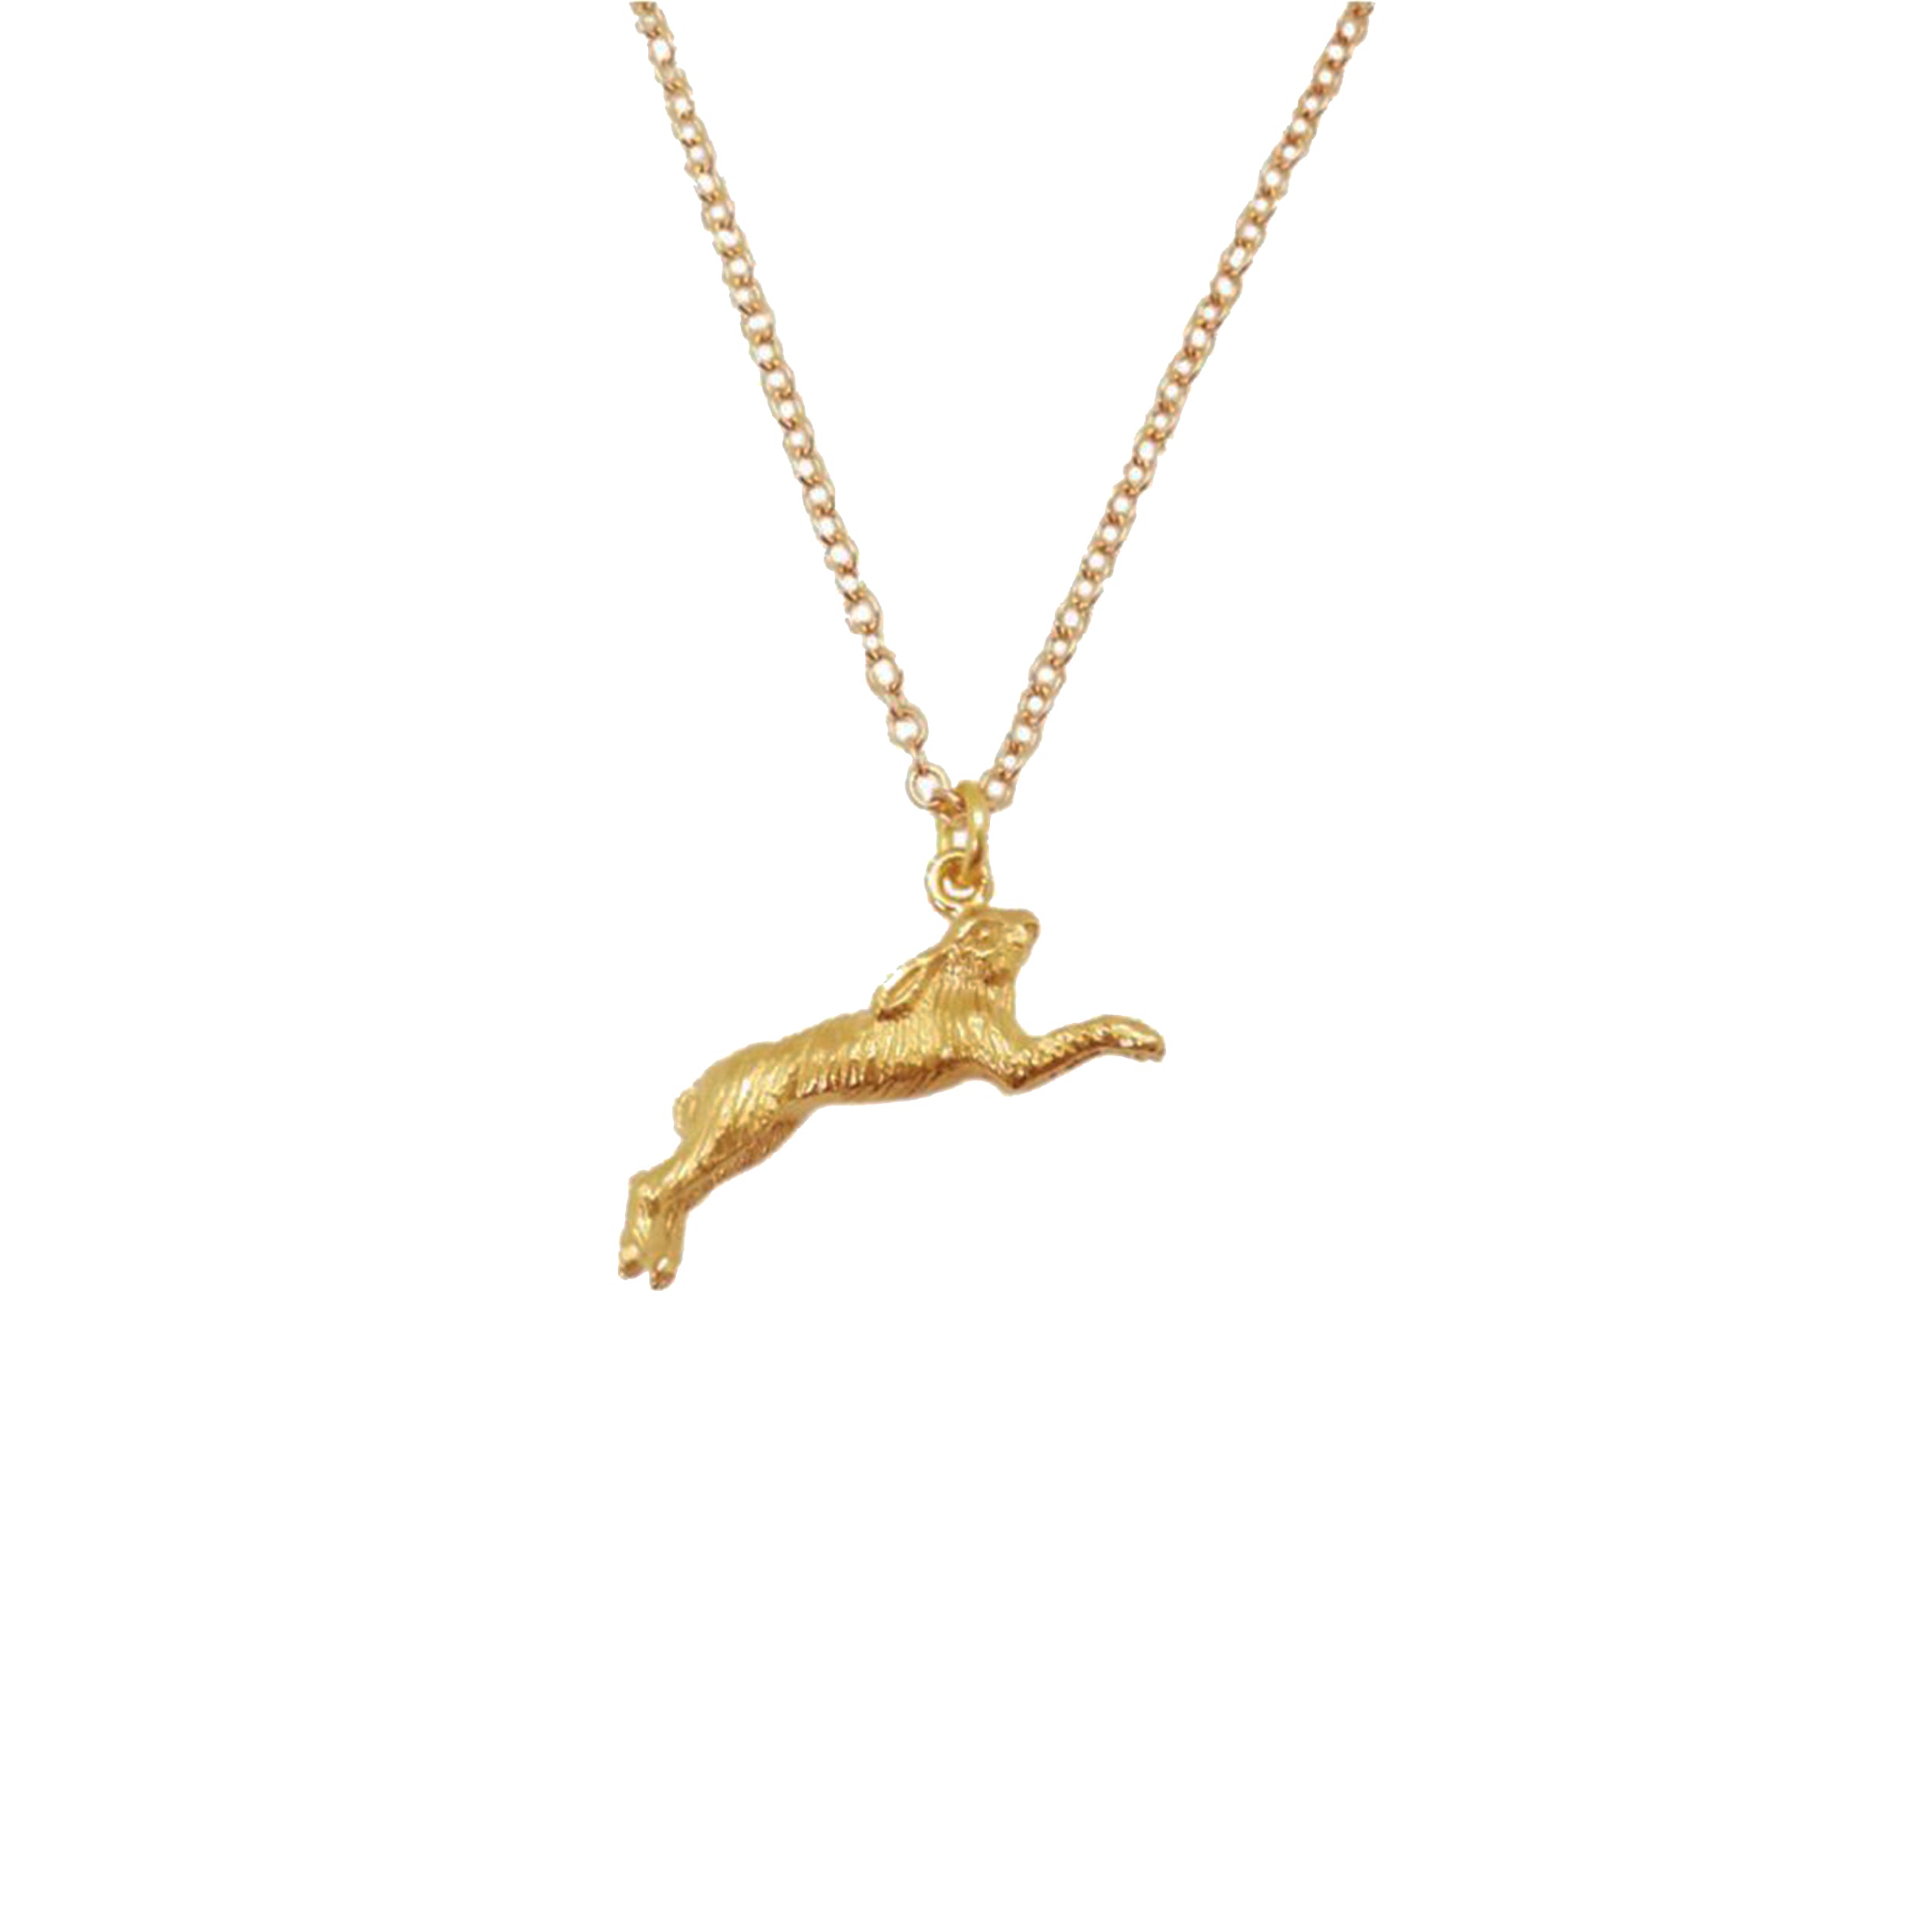 Leaping Hare Small Charm - Mirabelle Jewellery